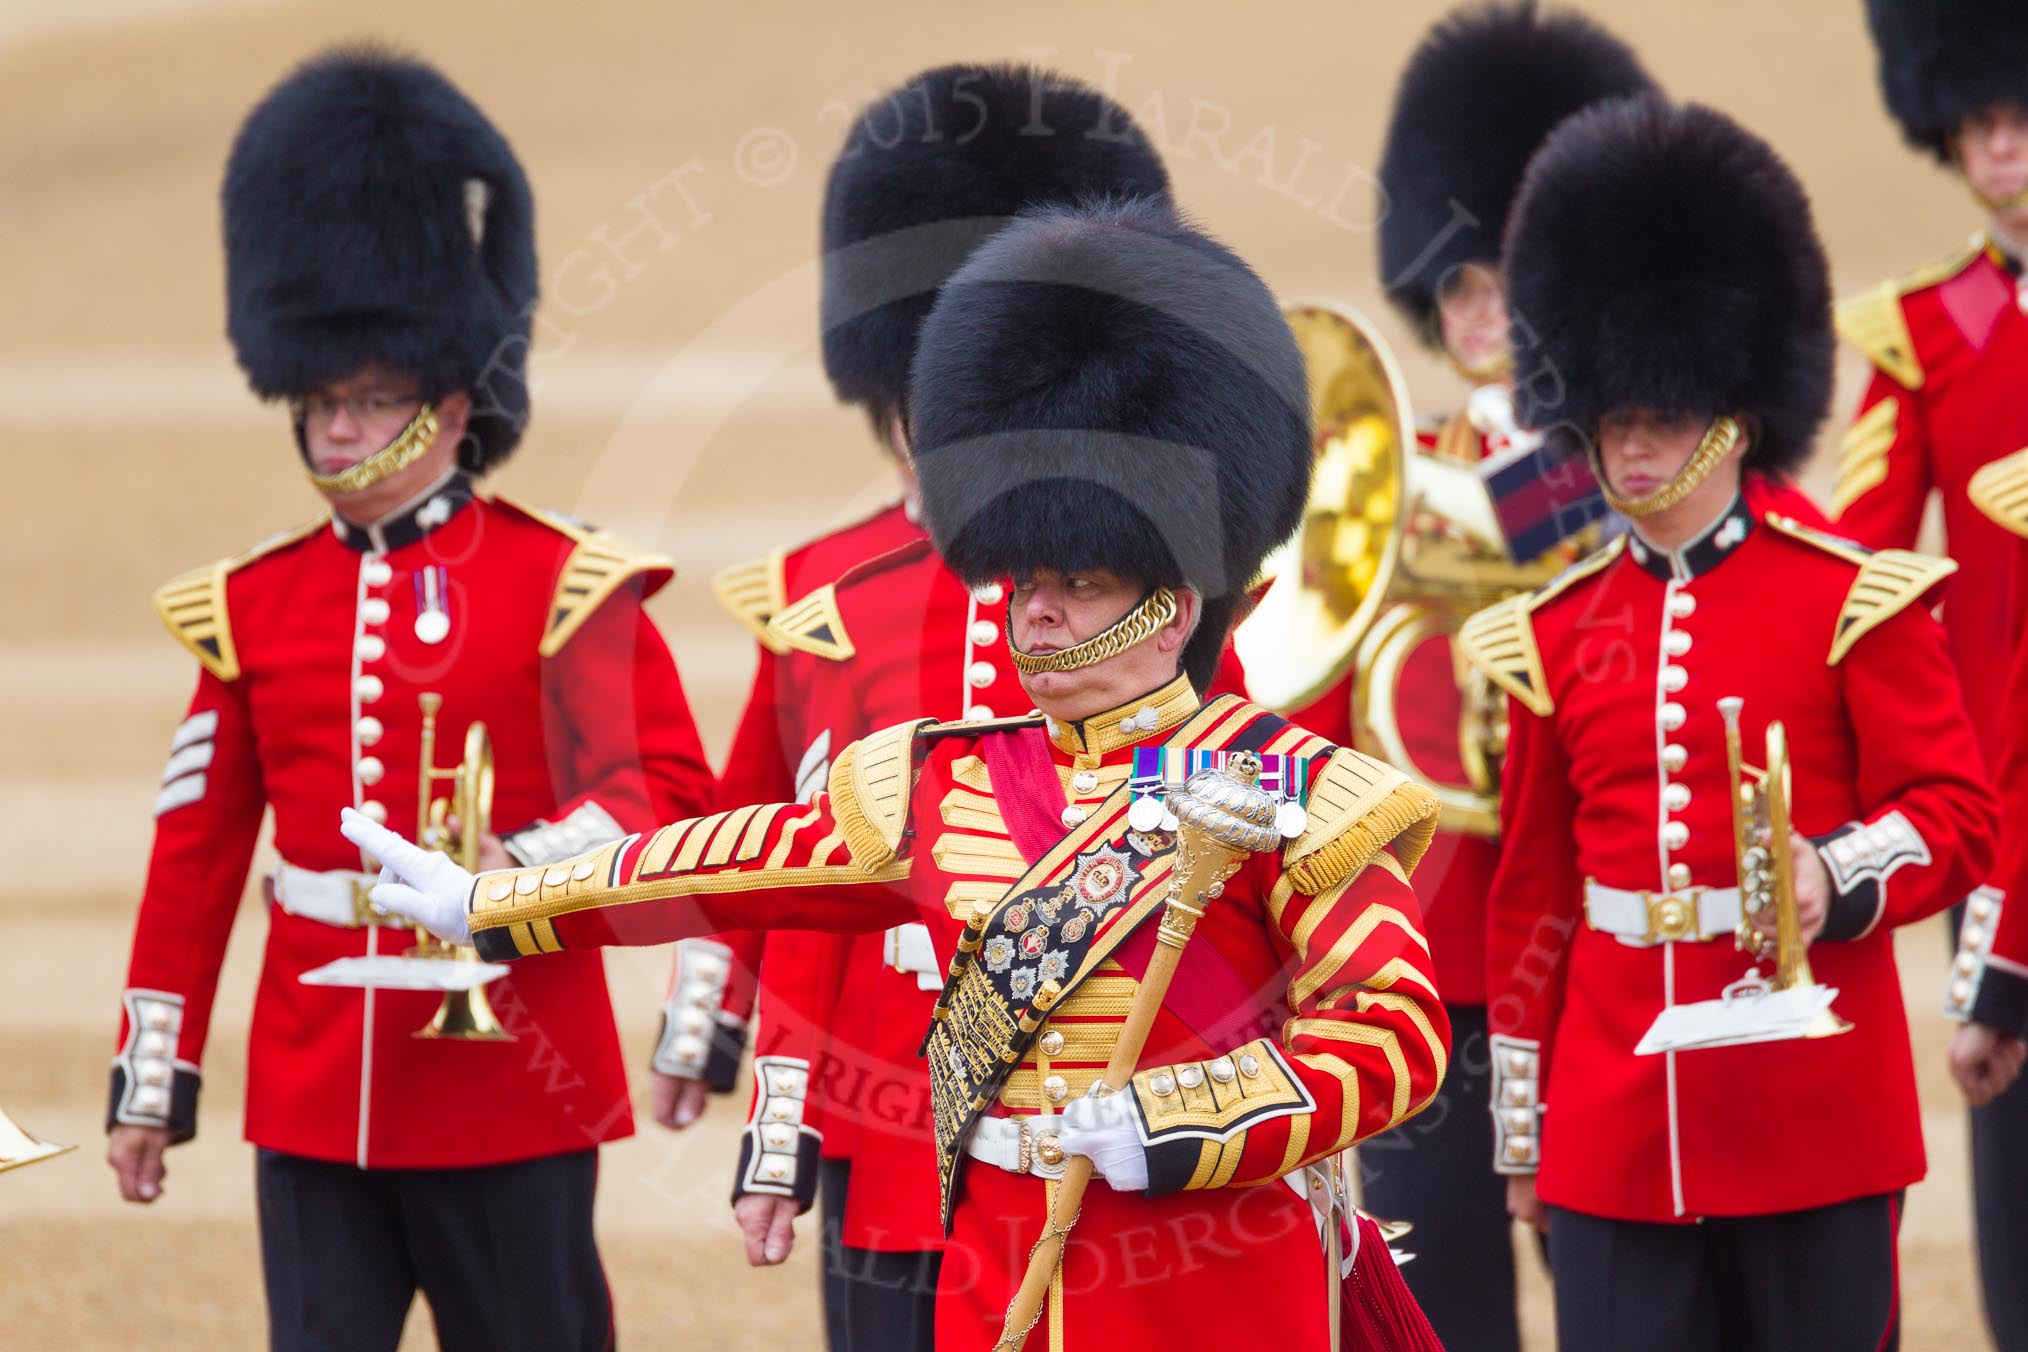 The Colonel's Review 2016.
Horse Guards Parade, Westminster,
London,

United Kingdom,
on 04 June 2016 at 10:26, image #66